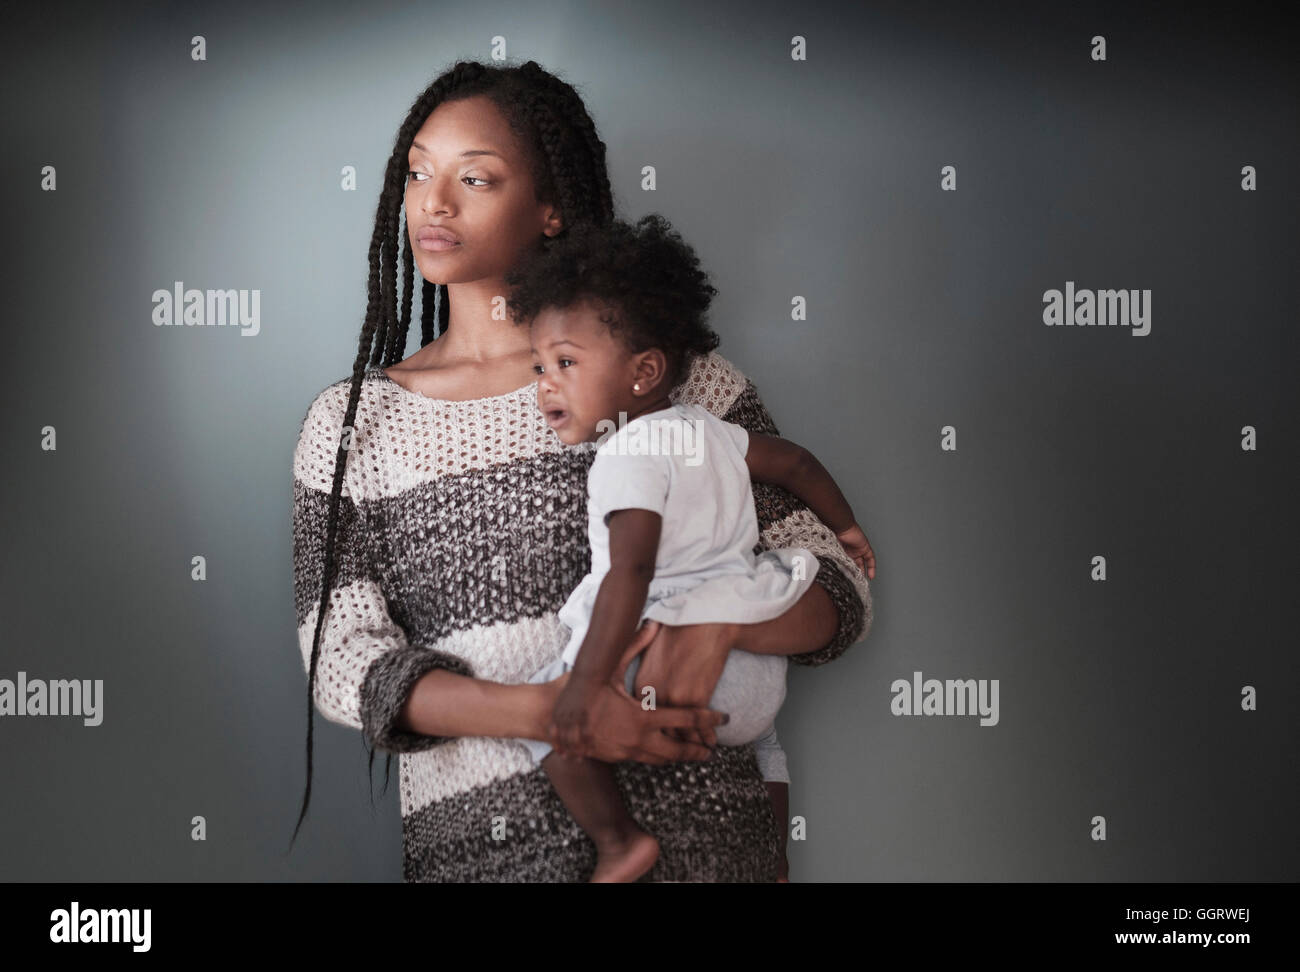 Thoughtful Black woman standing holding baby daughter Stock Photo